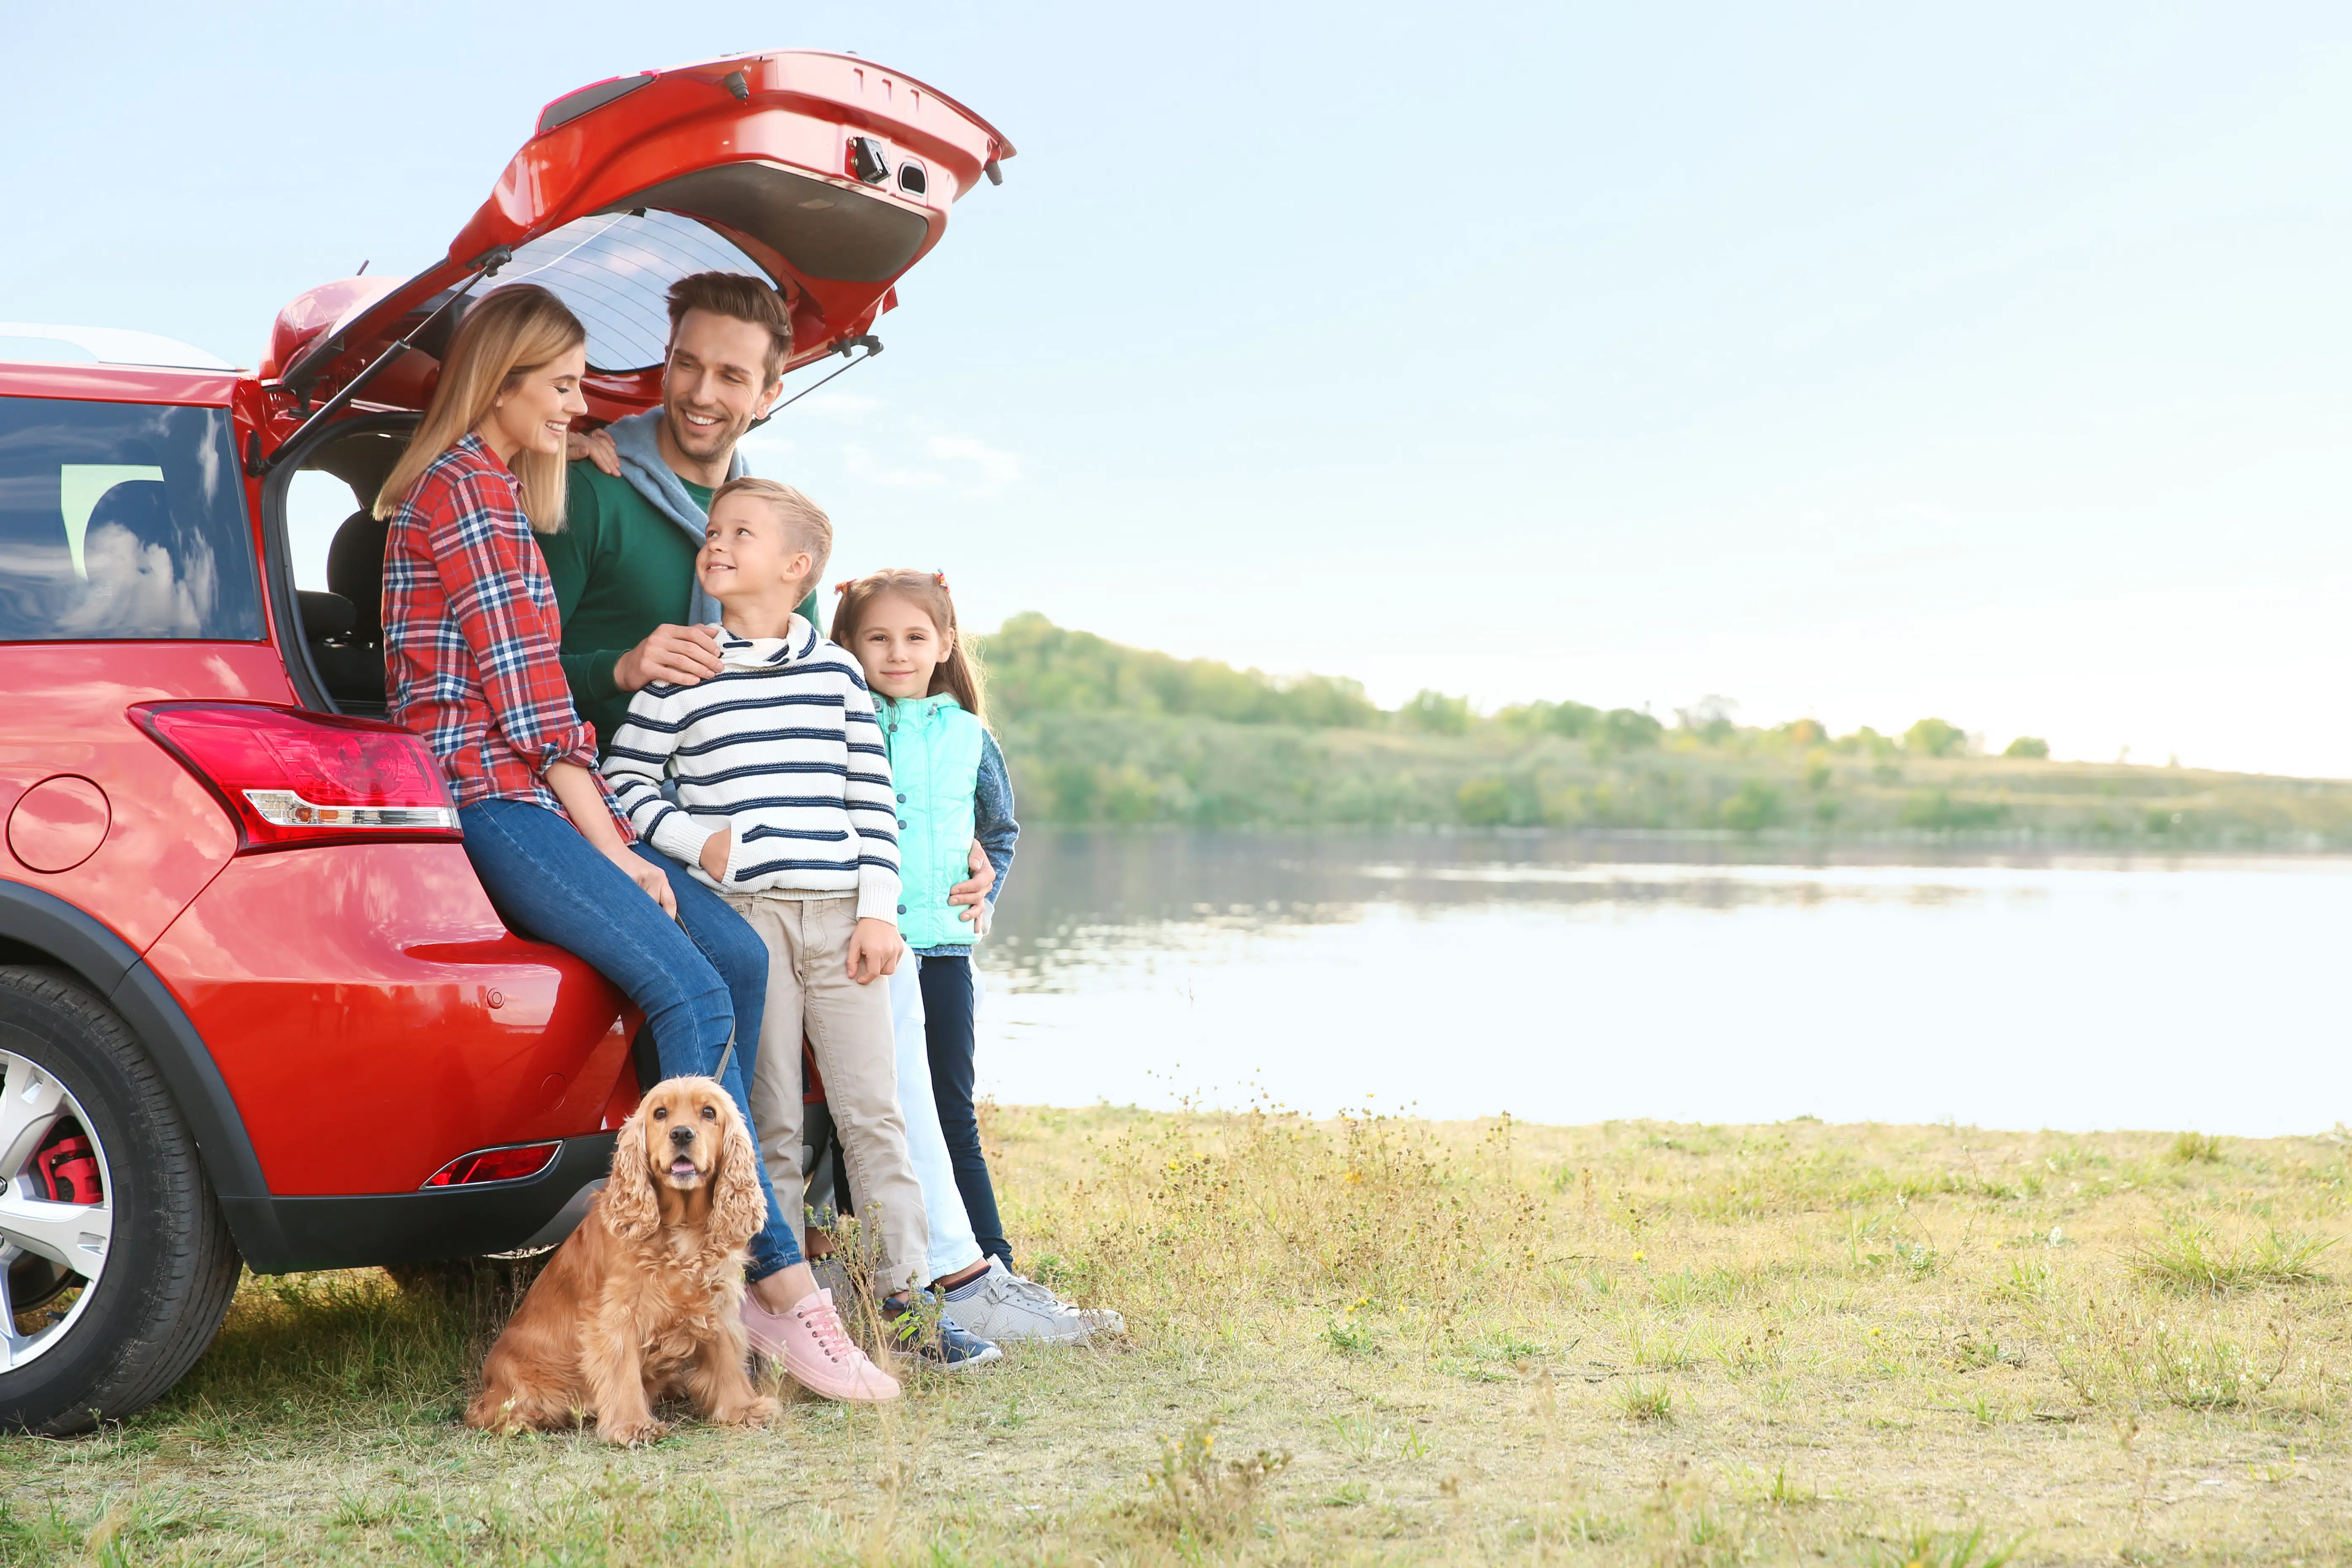 Car insurance is a given in this travelling family who also wonder if pet insurance is worth it.